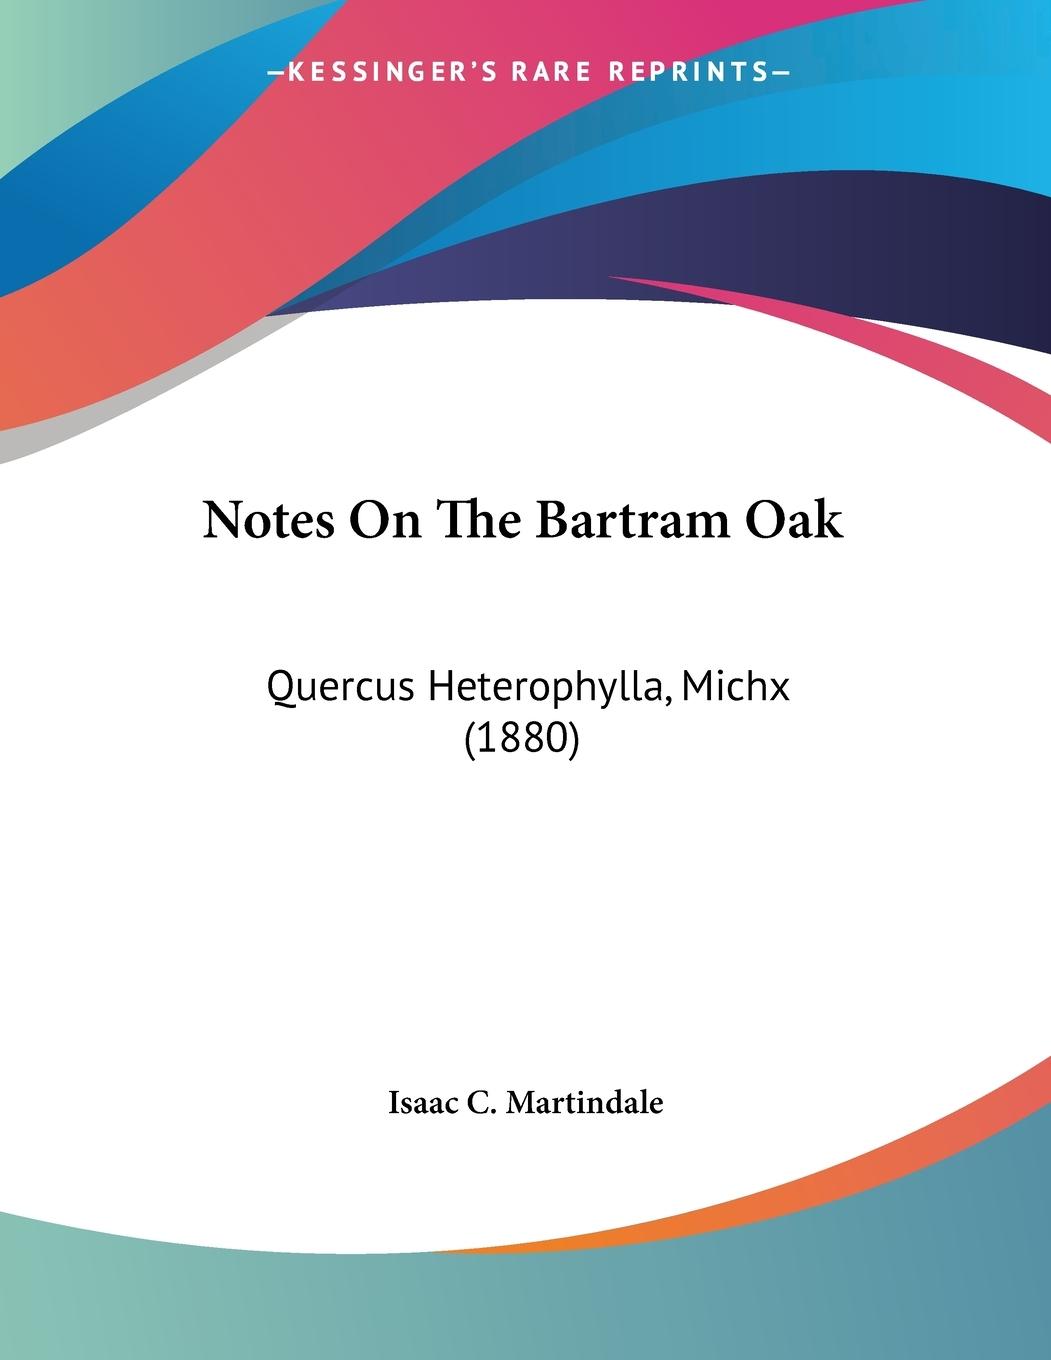 Notes On The Bartram Oak - Martindale, Isaac C.